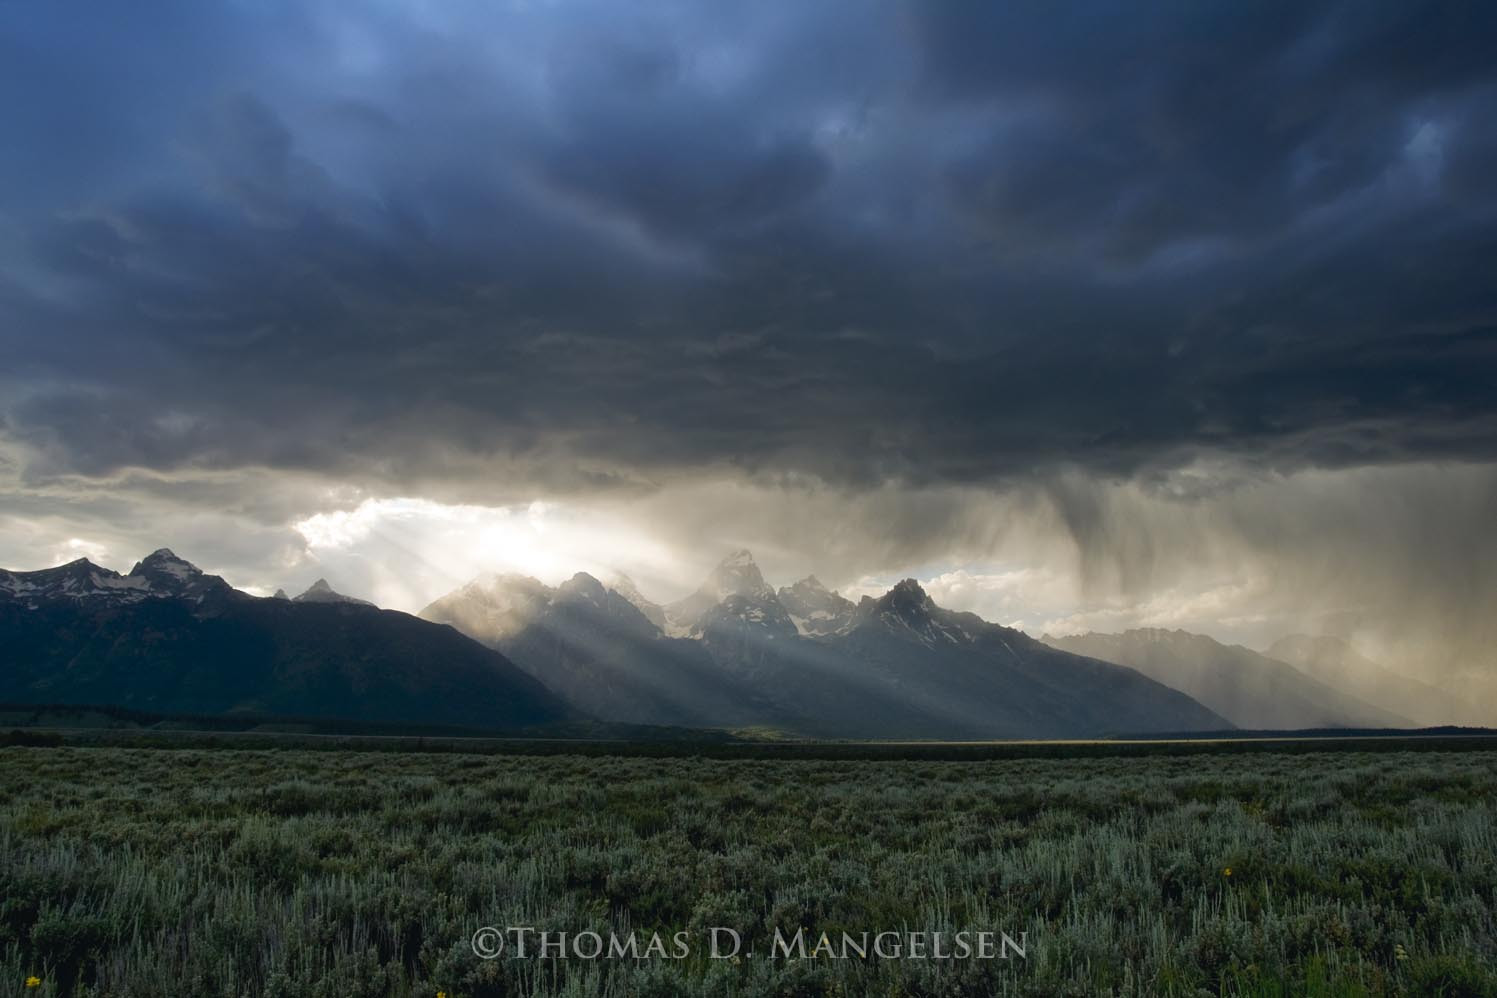 Storm over the Tetons by Thomas D. Mangelsen